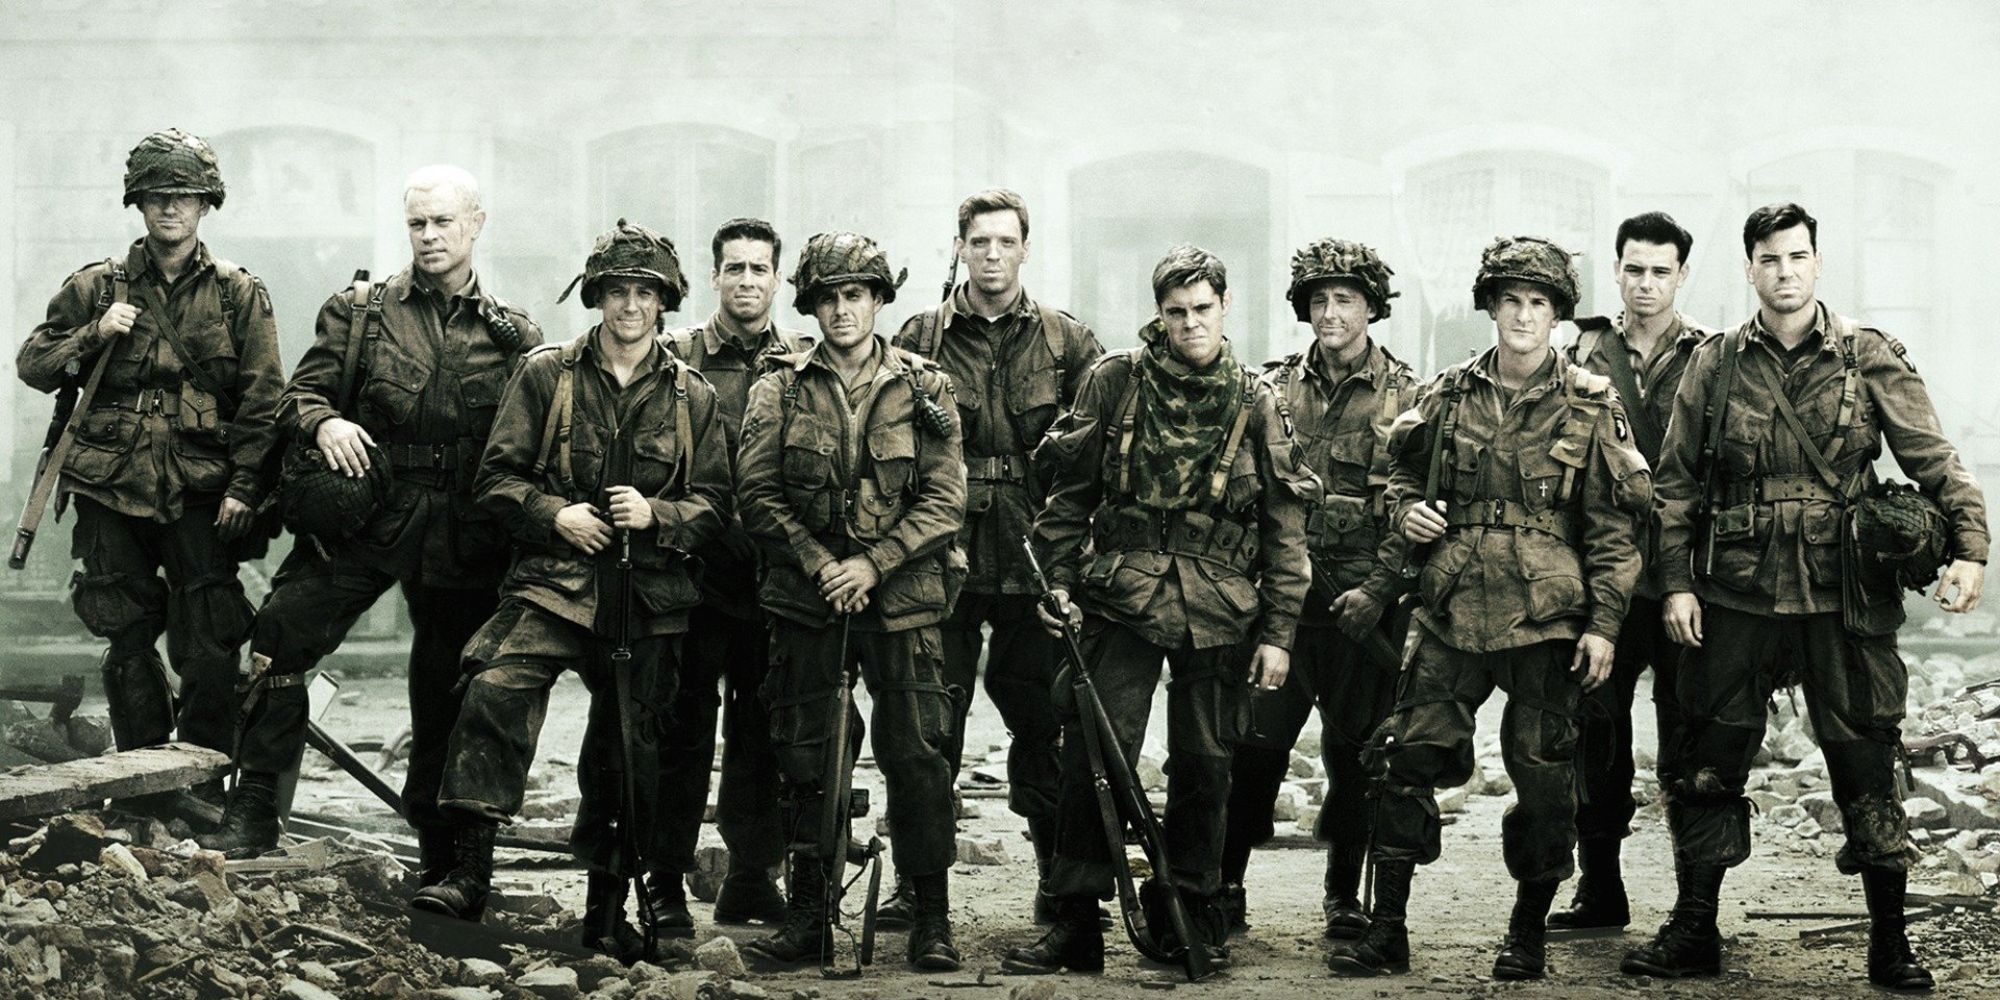 A group of soldiers pose for a photo from the HBO miniseries Band of Brothers.